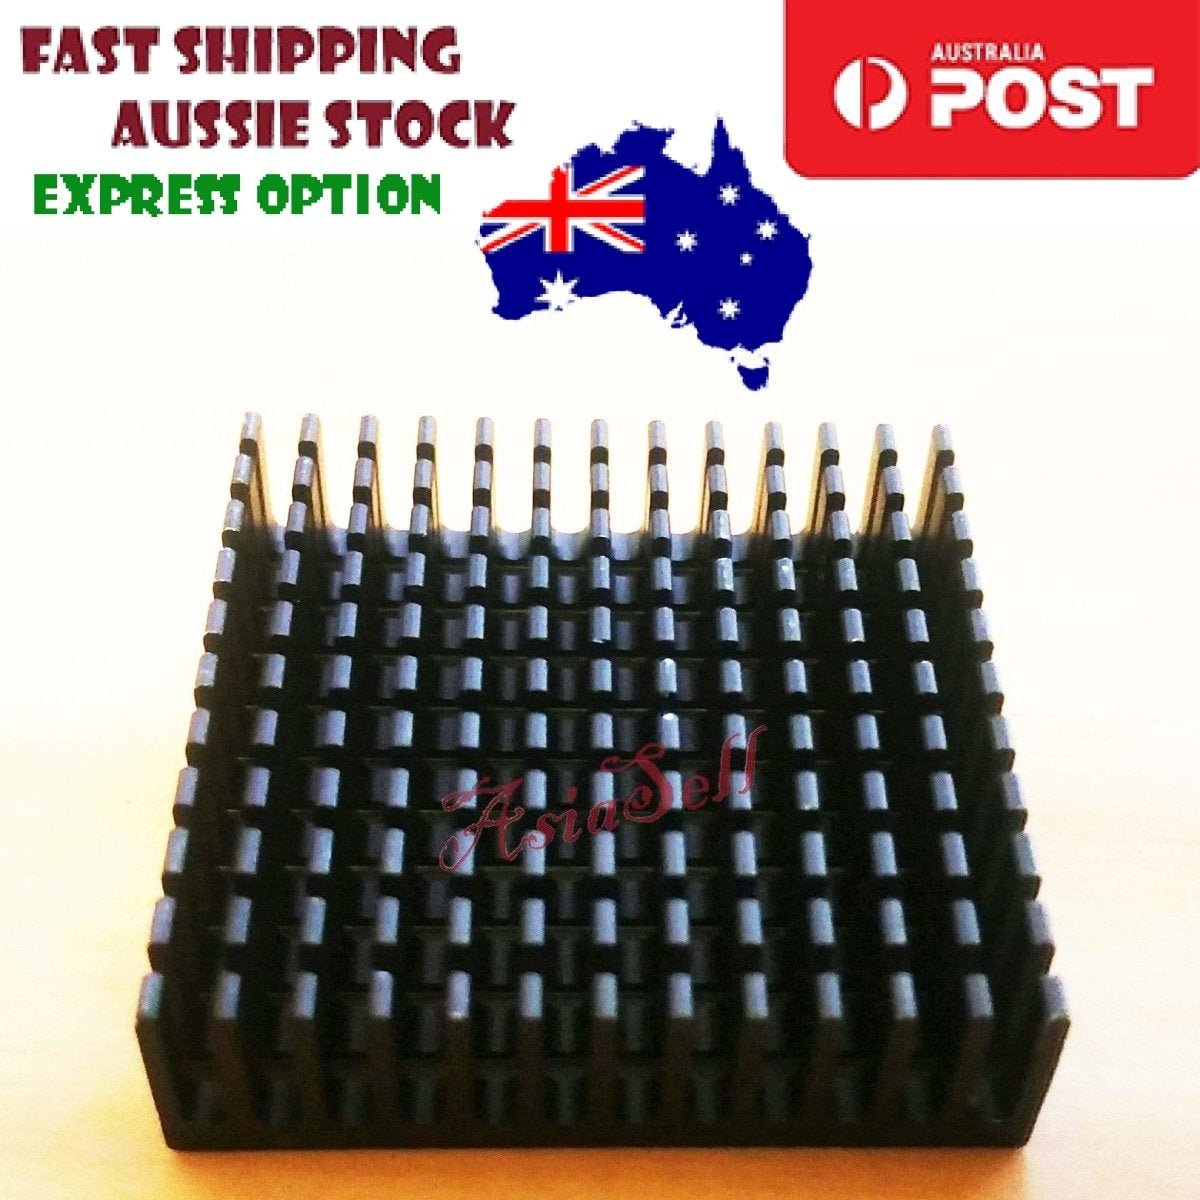 2x Heatsink 50x50x11 40x40x11mm 25x25x10mm 19x19x5mm 14x14x8mm Black Heat Sink - 50x50x11mm (no backing) - - Asia Sell